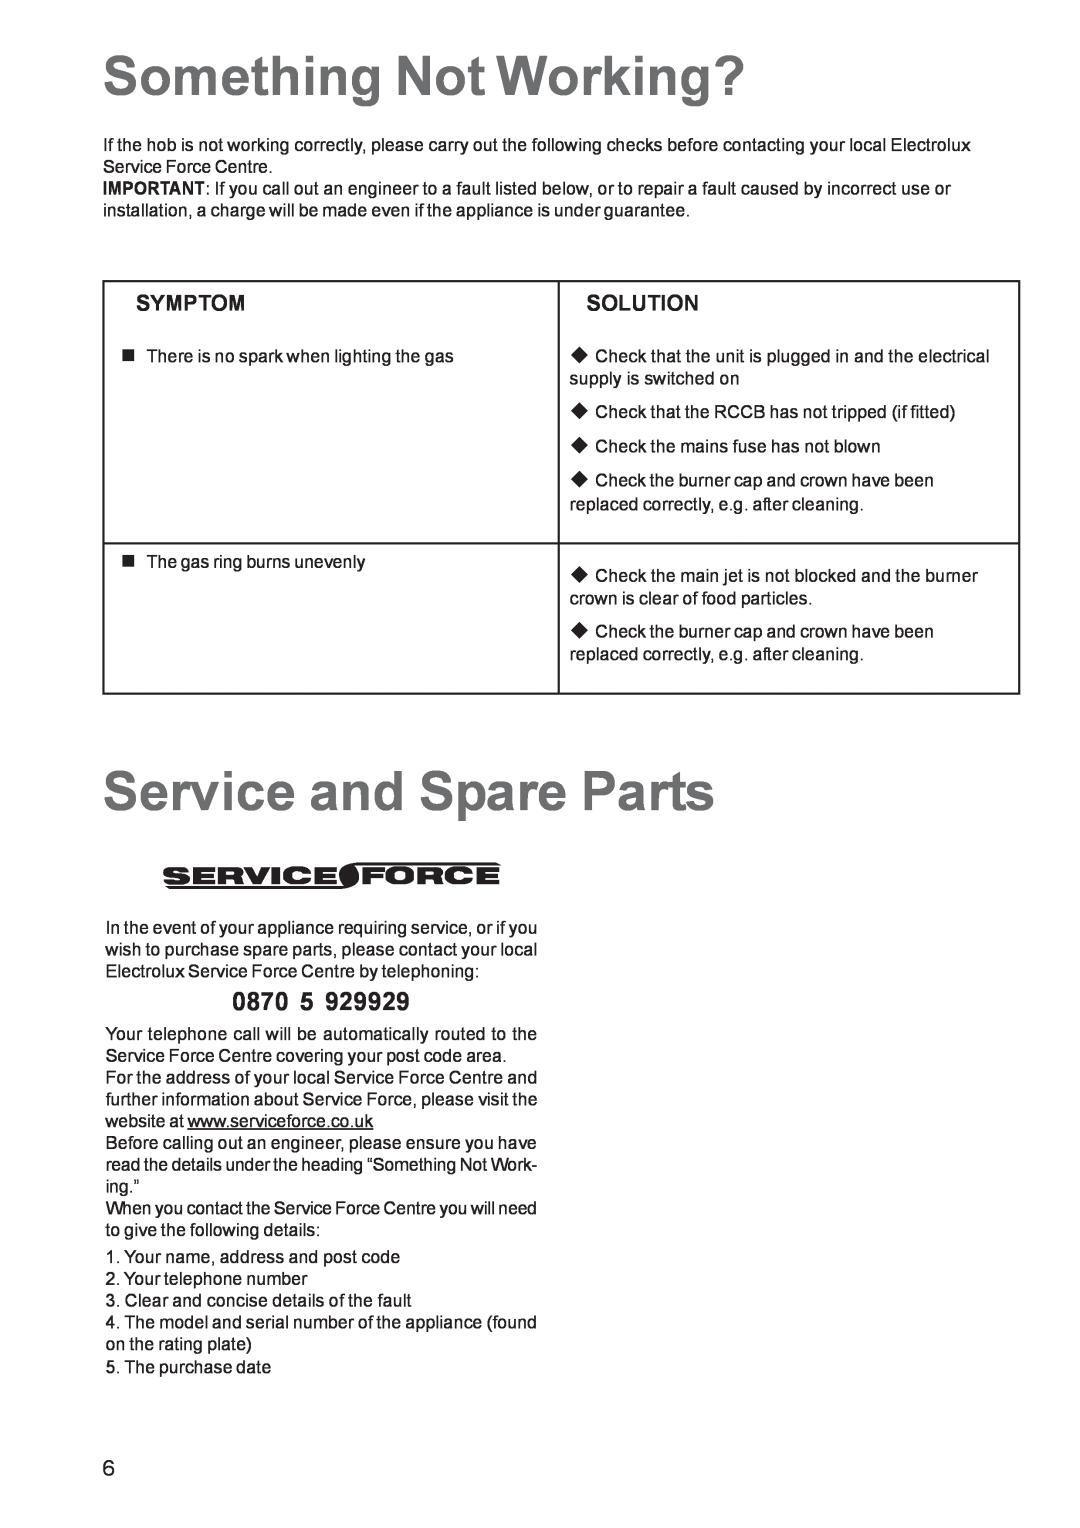 Electrolux EHG 6762 manual Something Not Working?, Service and Spare Parts, Symptom, Solution, 0870 